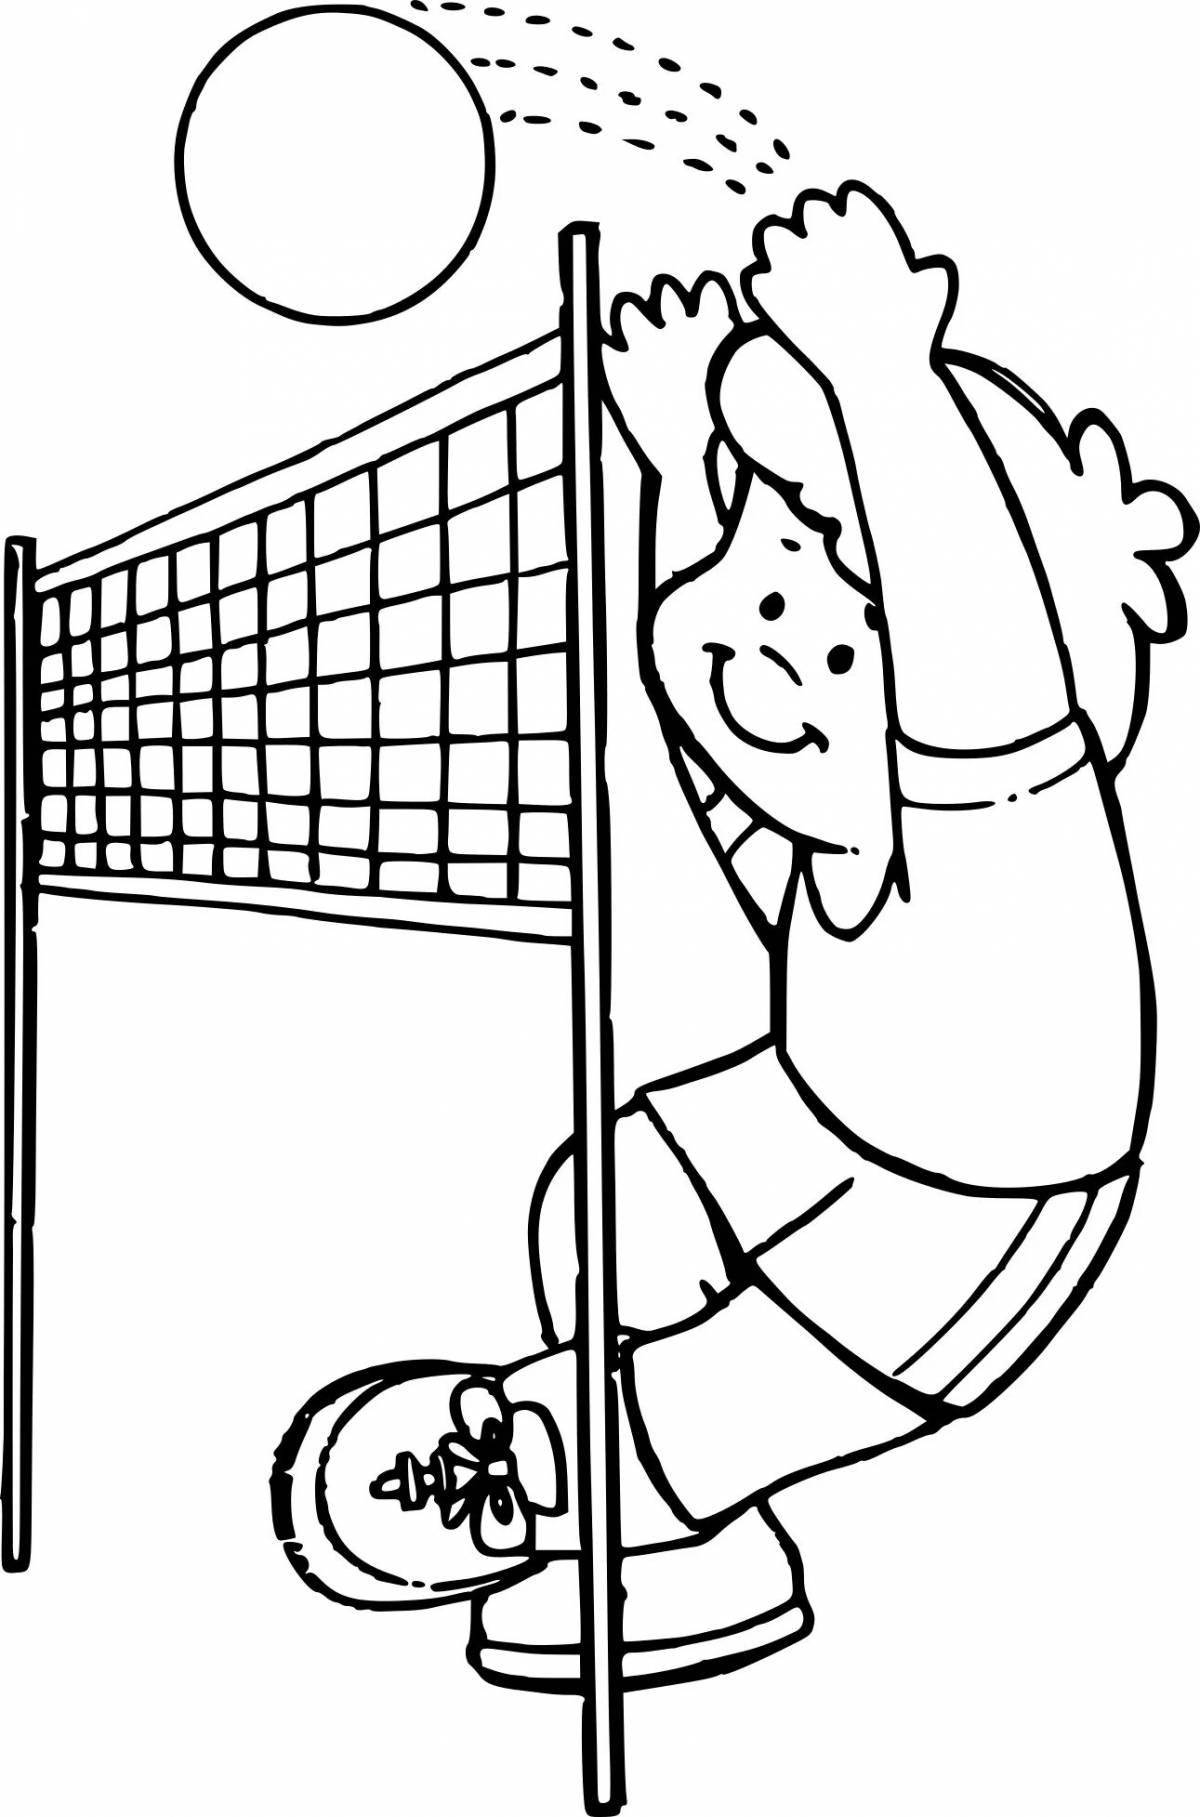 Amazing sports coloring pages